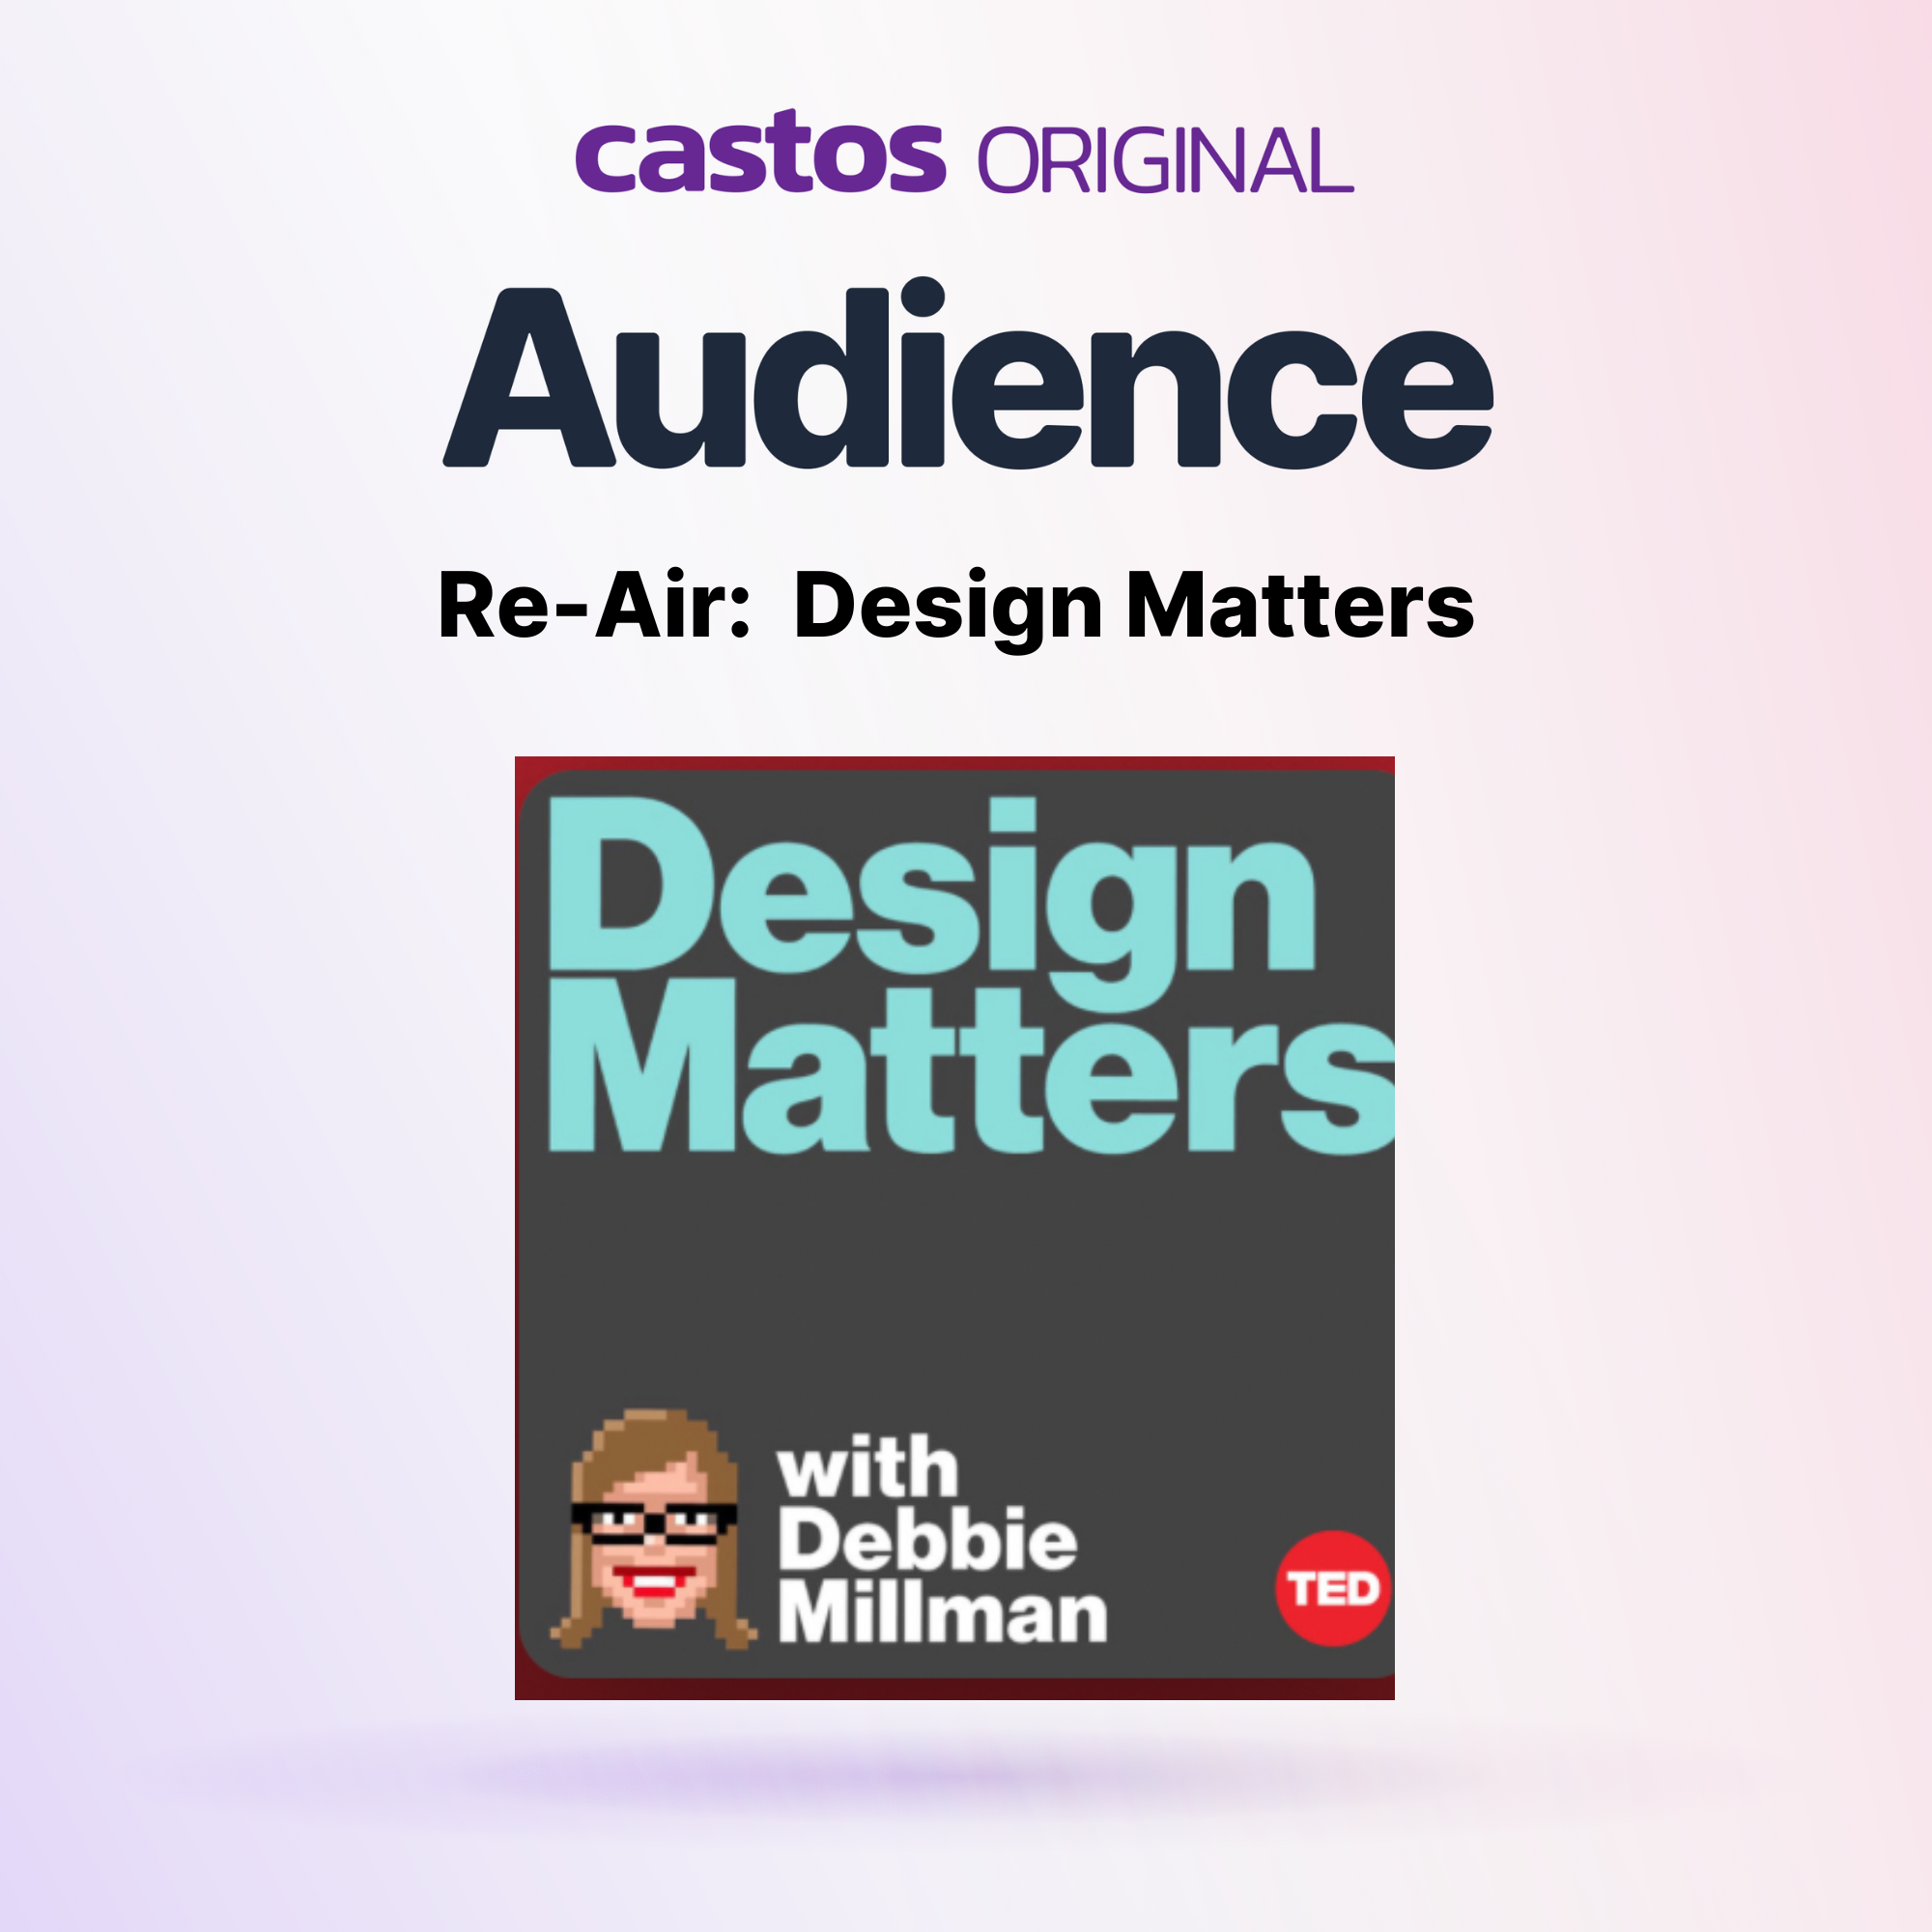 3 Clips Re-Air: Design Matters with Debbie Millman